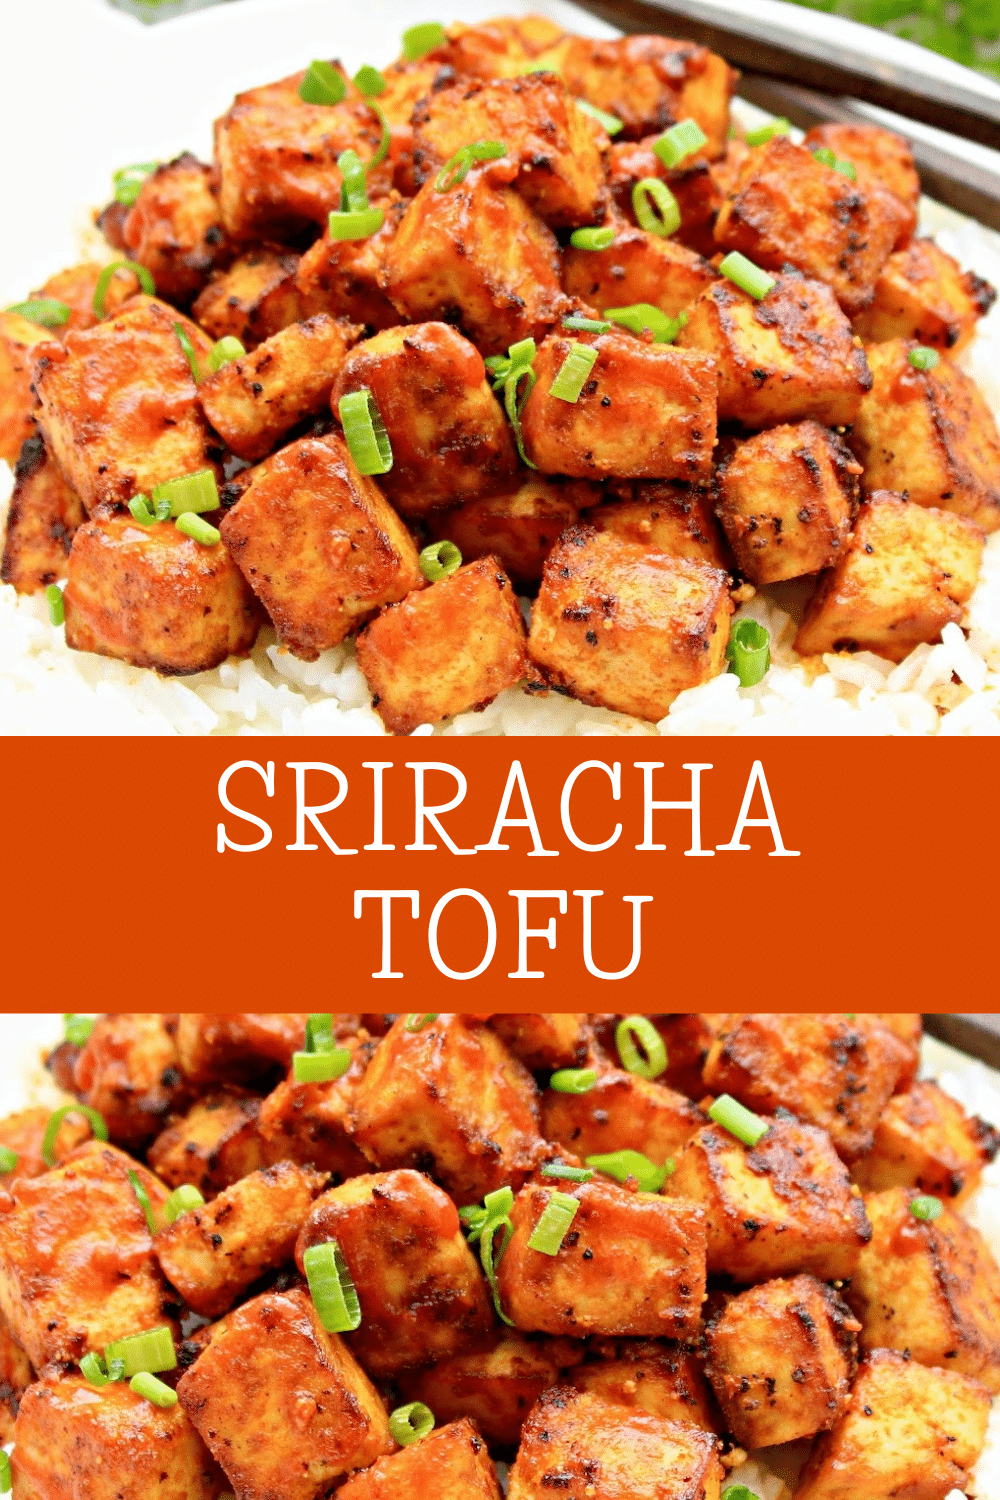 Sriracha Tofu Recipe ~ Baked tofu in spicy sriracha sauce - easy to make with simple ingredients and packed with bold flavor!  via @thiswifecooks